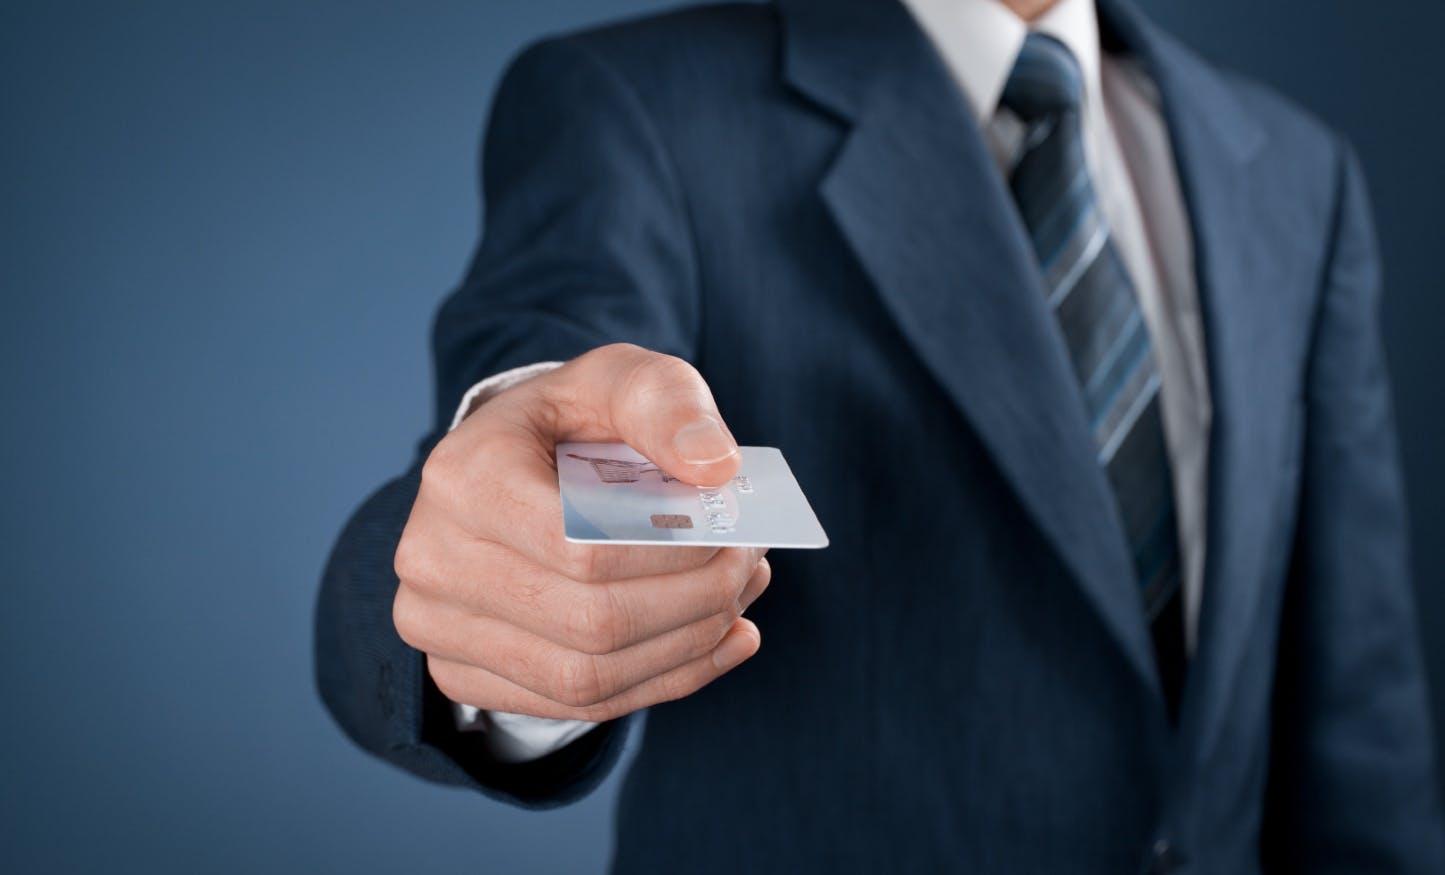 The Best Business Credit Cards in 2022: Pros, Cons, and More